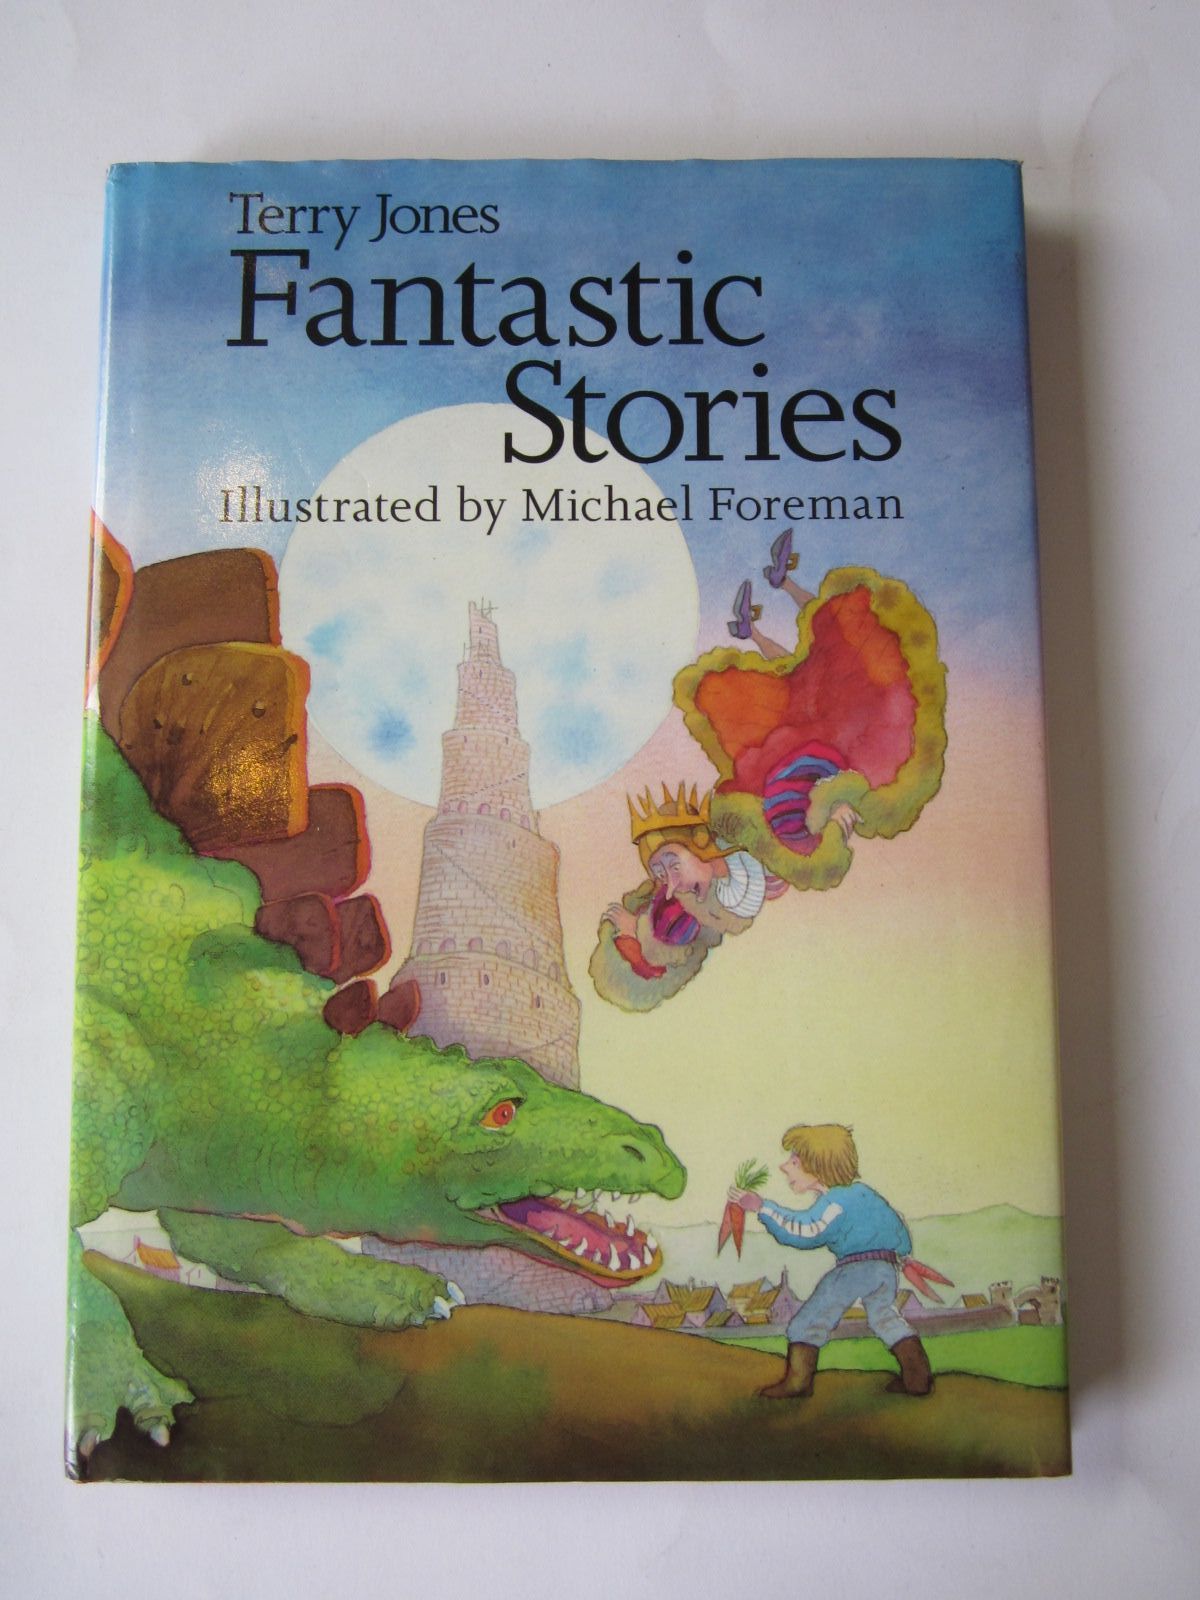 Cover of FANTASTIC STORIES by Terry Jones